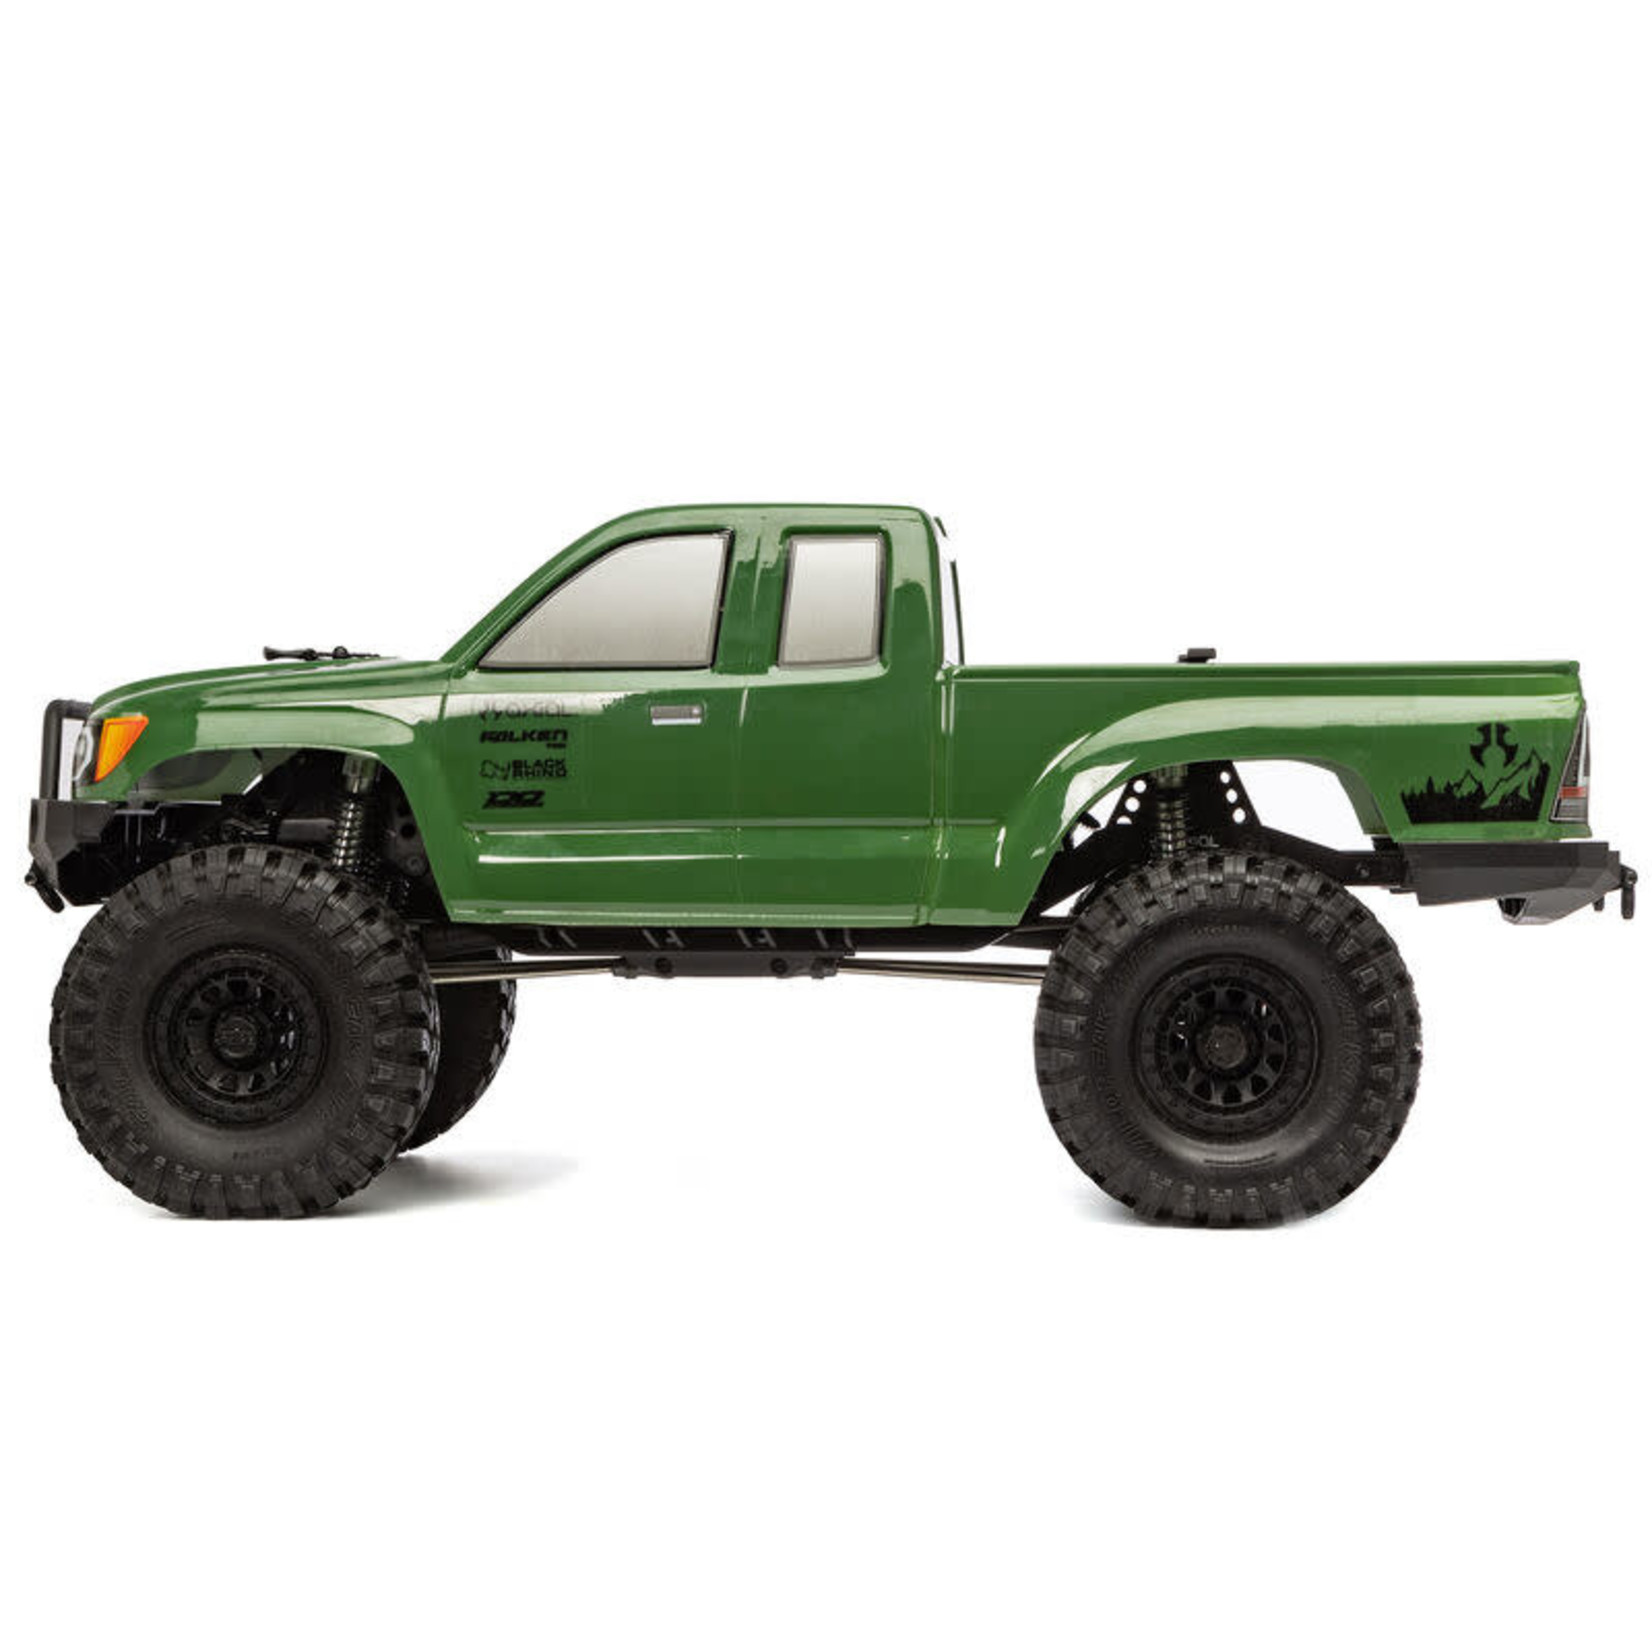 AXIAL SCX10 III Base Camp 1/10th 4WD RTR Green